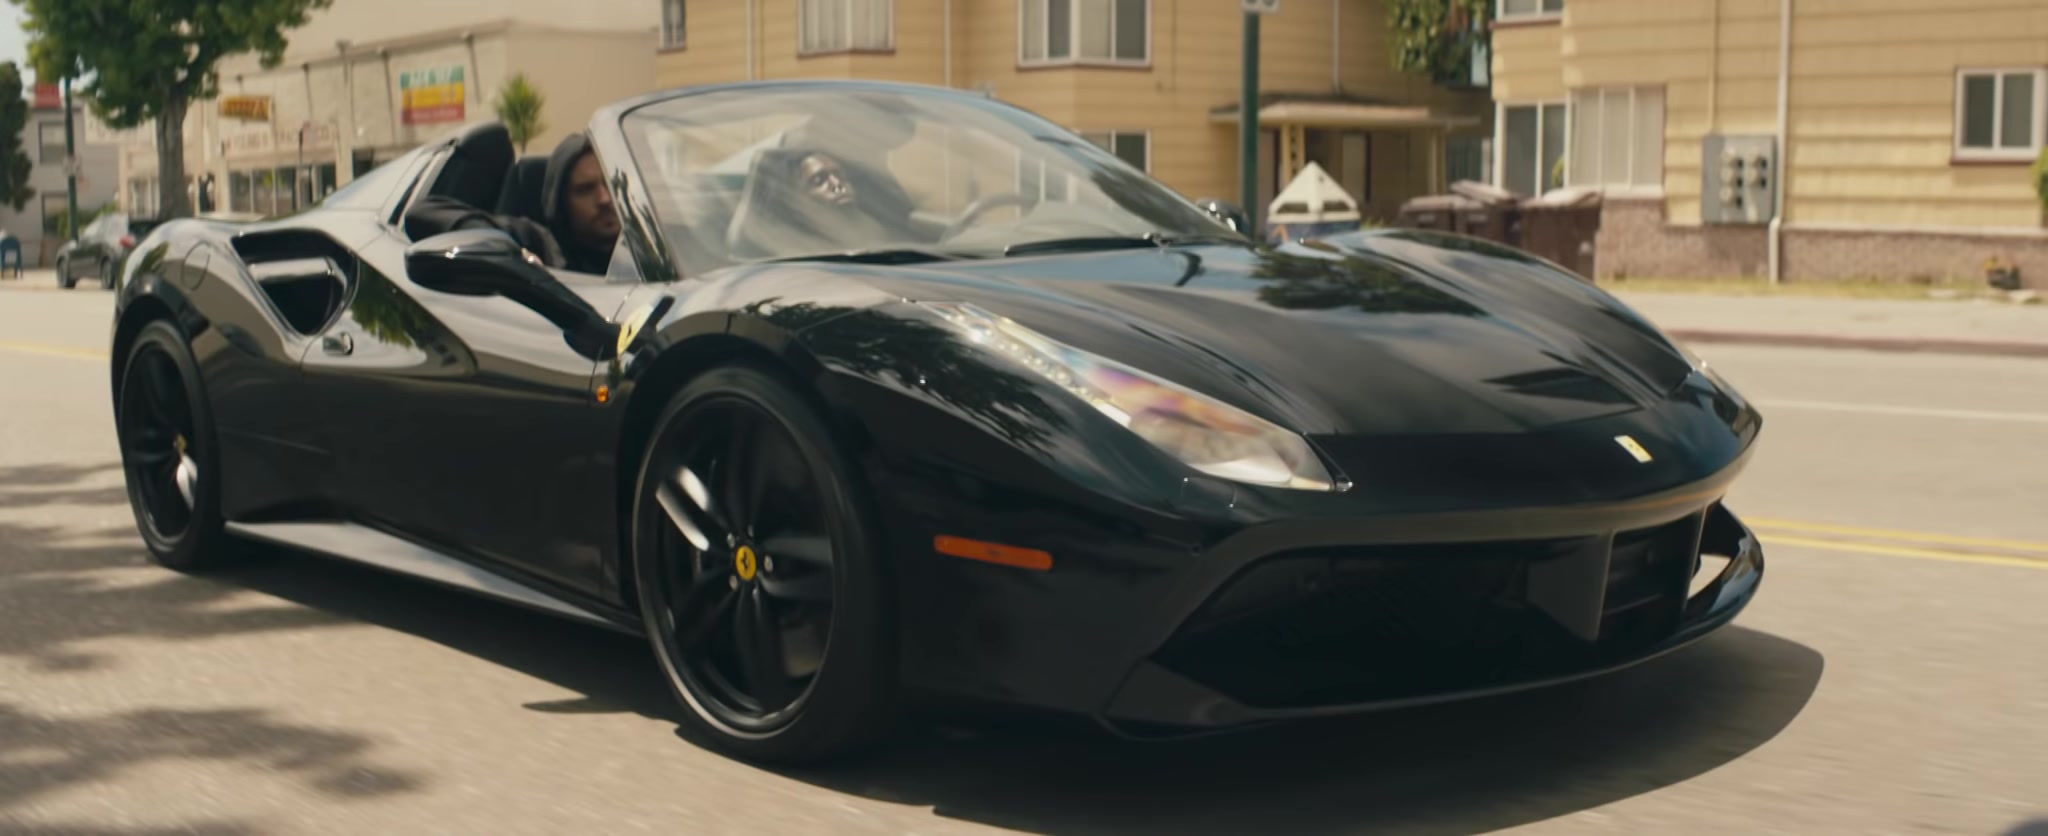 Ferrari Black Sports Car in Power by G-Eazy ft. Nef The Pharaoh, P-Lo (2018) Official ...2048 x 836